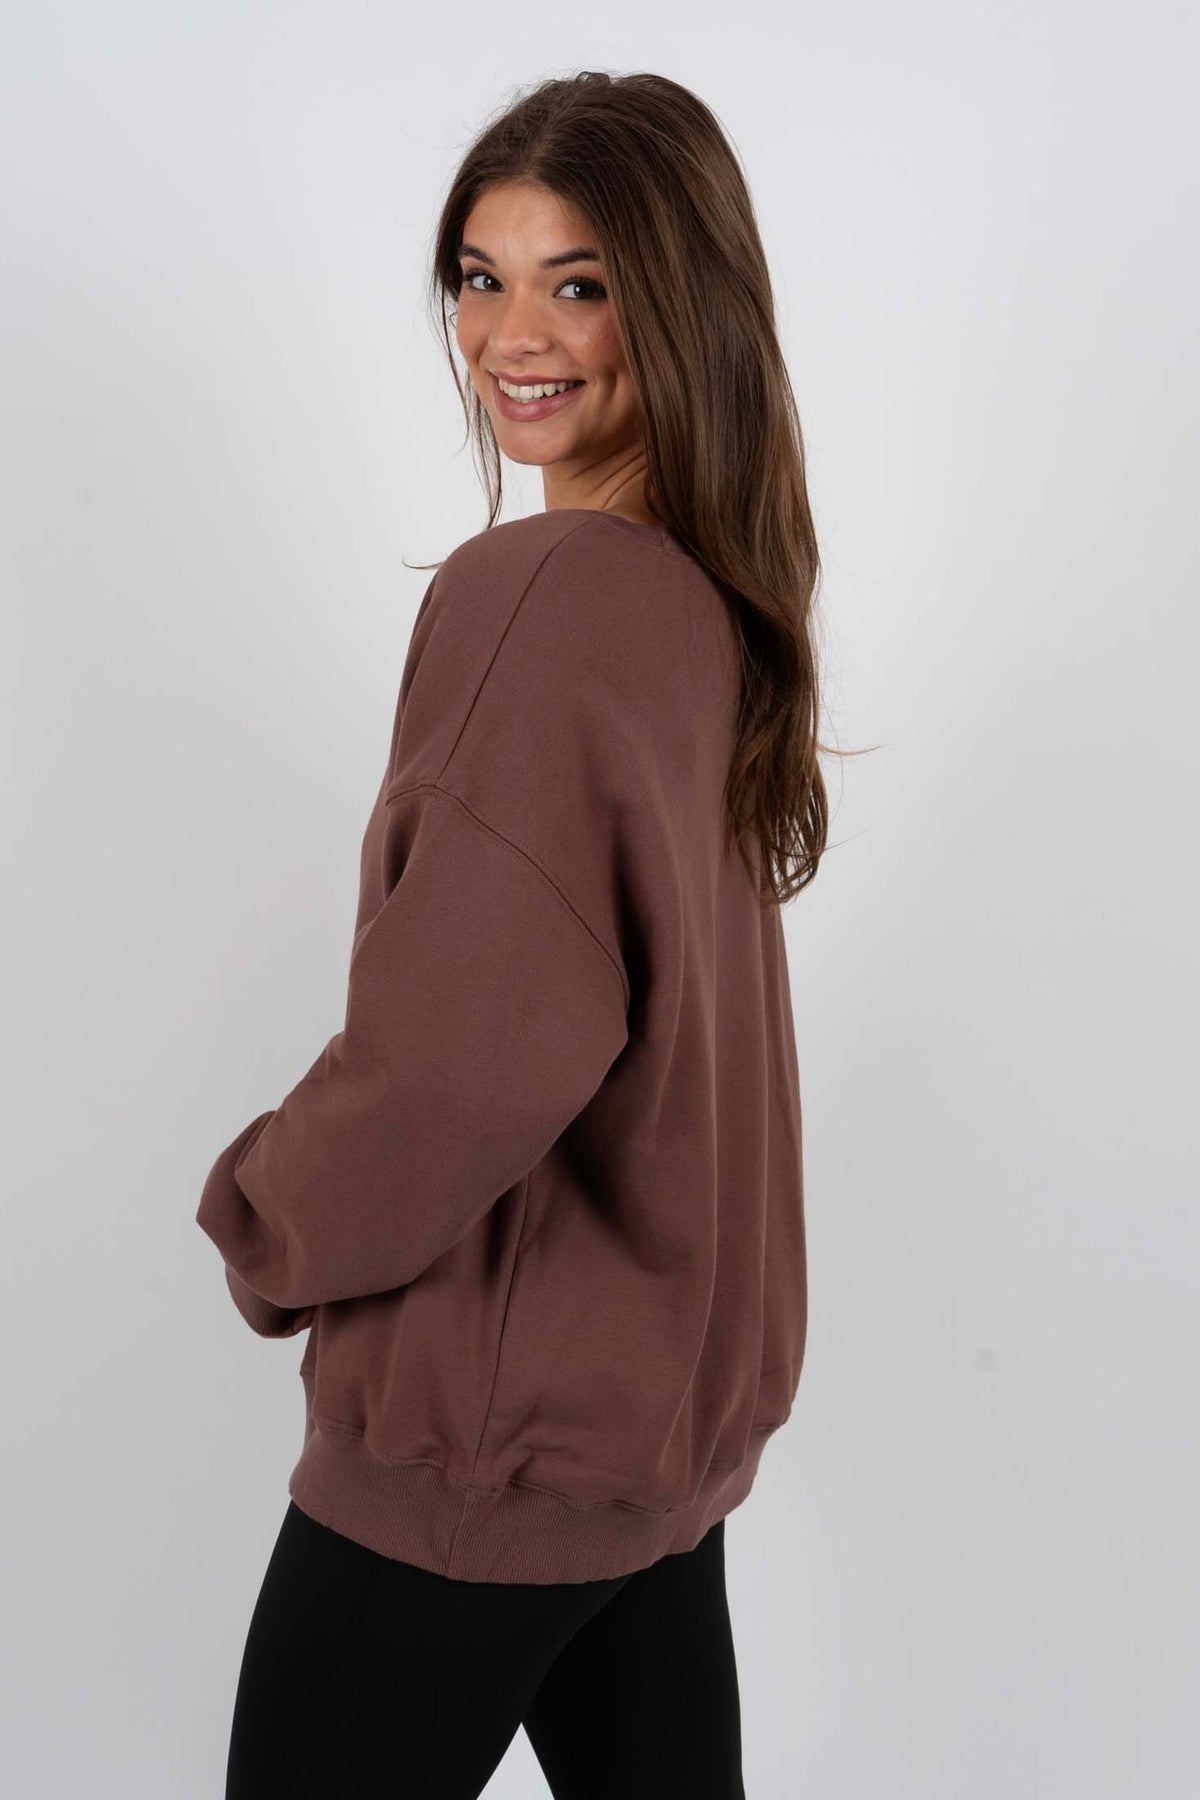 Just My Type Pullover (Chocolate)